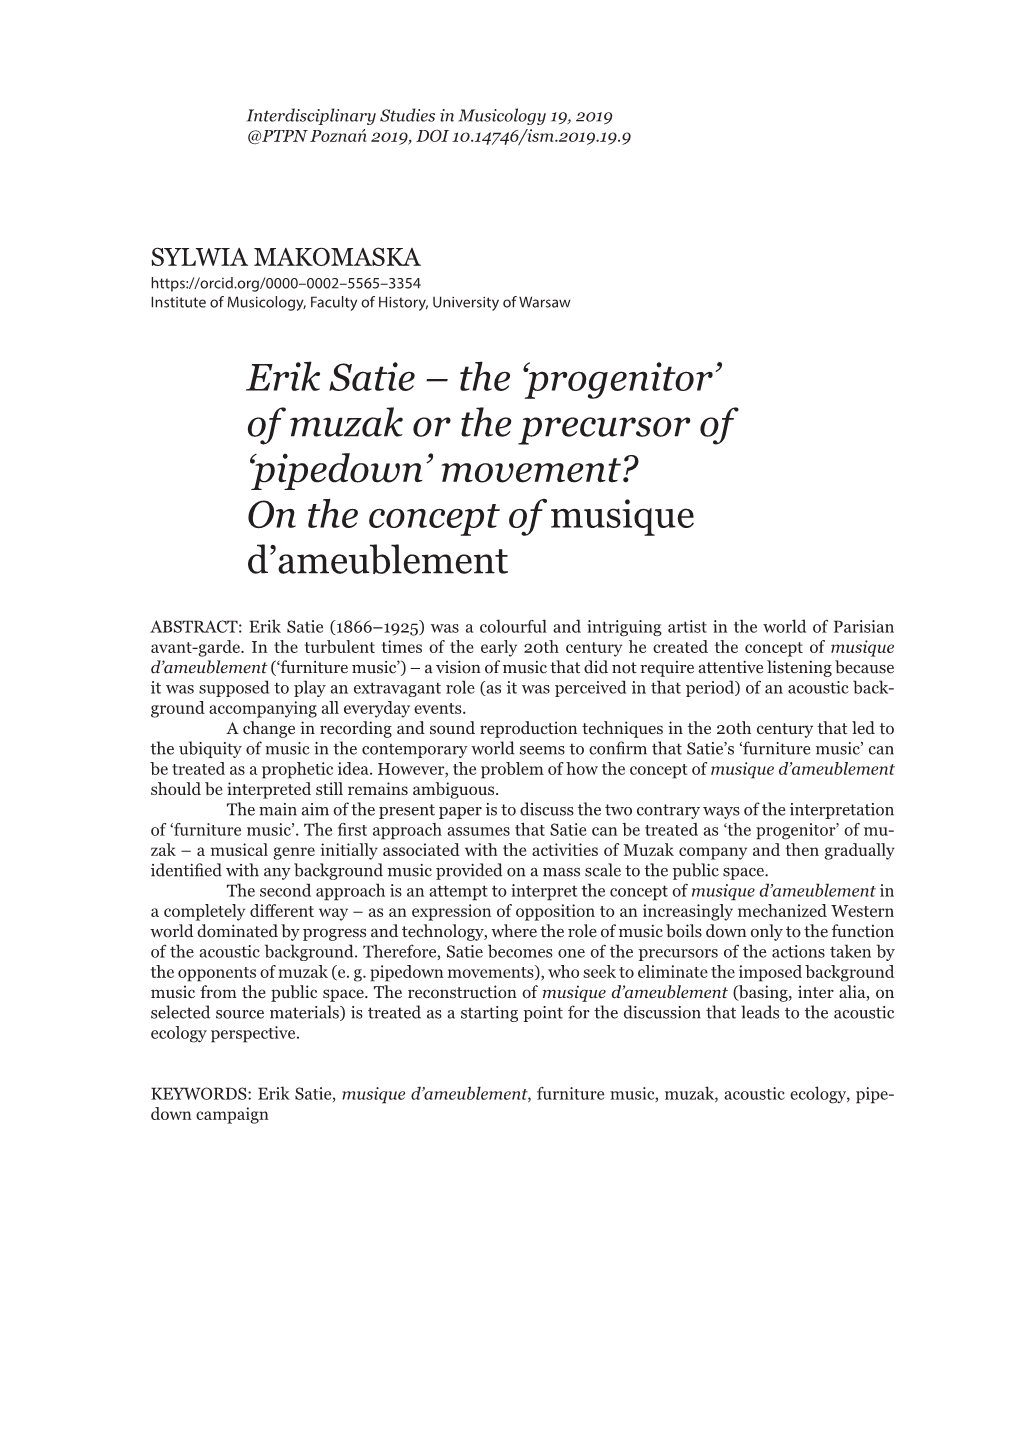 Erik Satie – the ‘Progenitor’ of Muzak Or the Precursor of ‘Pipedown’ Movement? on the Concept of Musique D’Ameublement